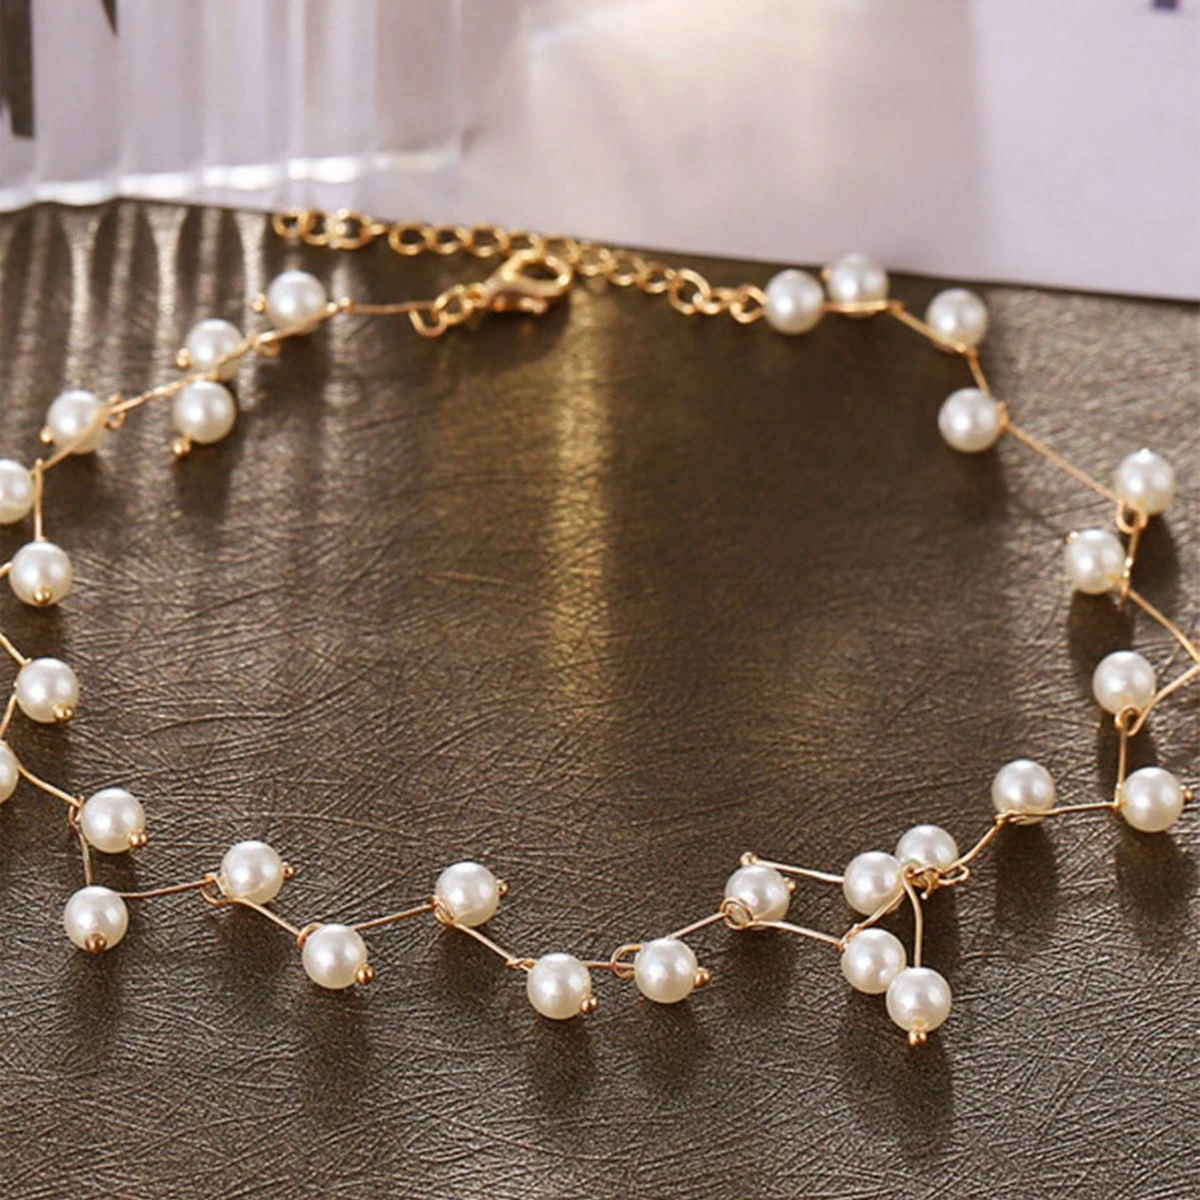 Elegant Delicate Pearl Clavicle Necklace for Women Fashion Girl Jewelry